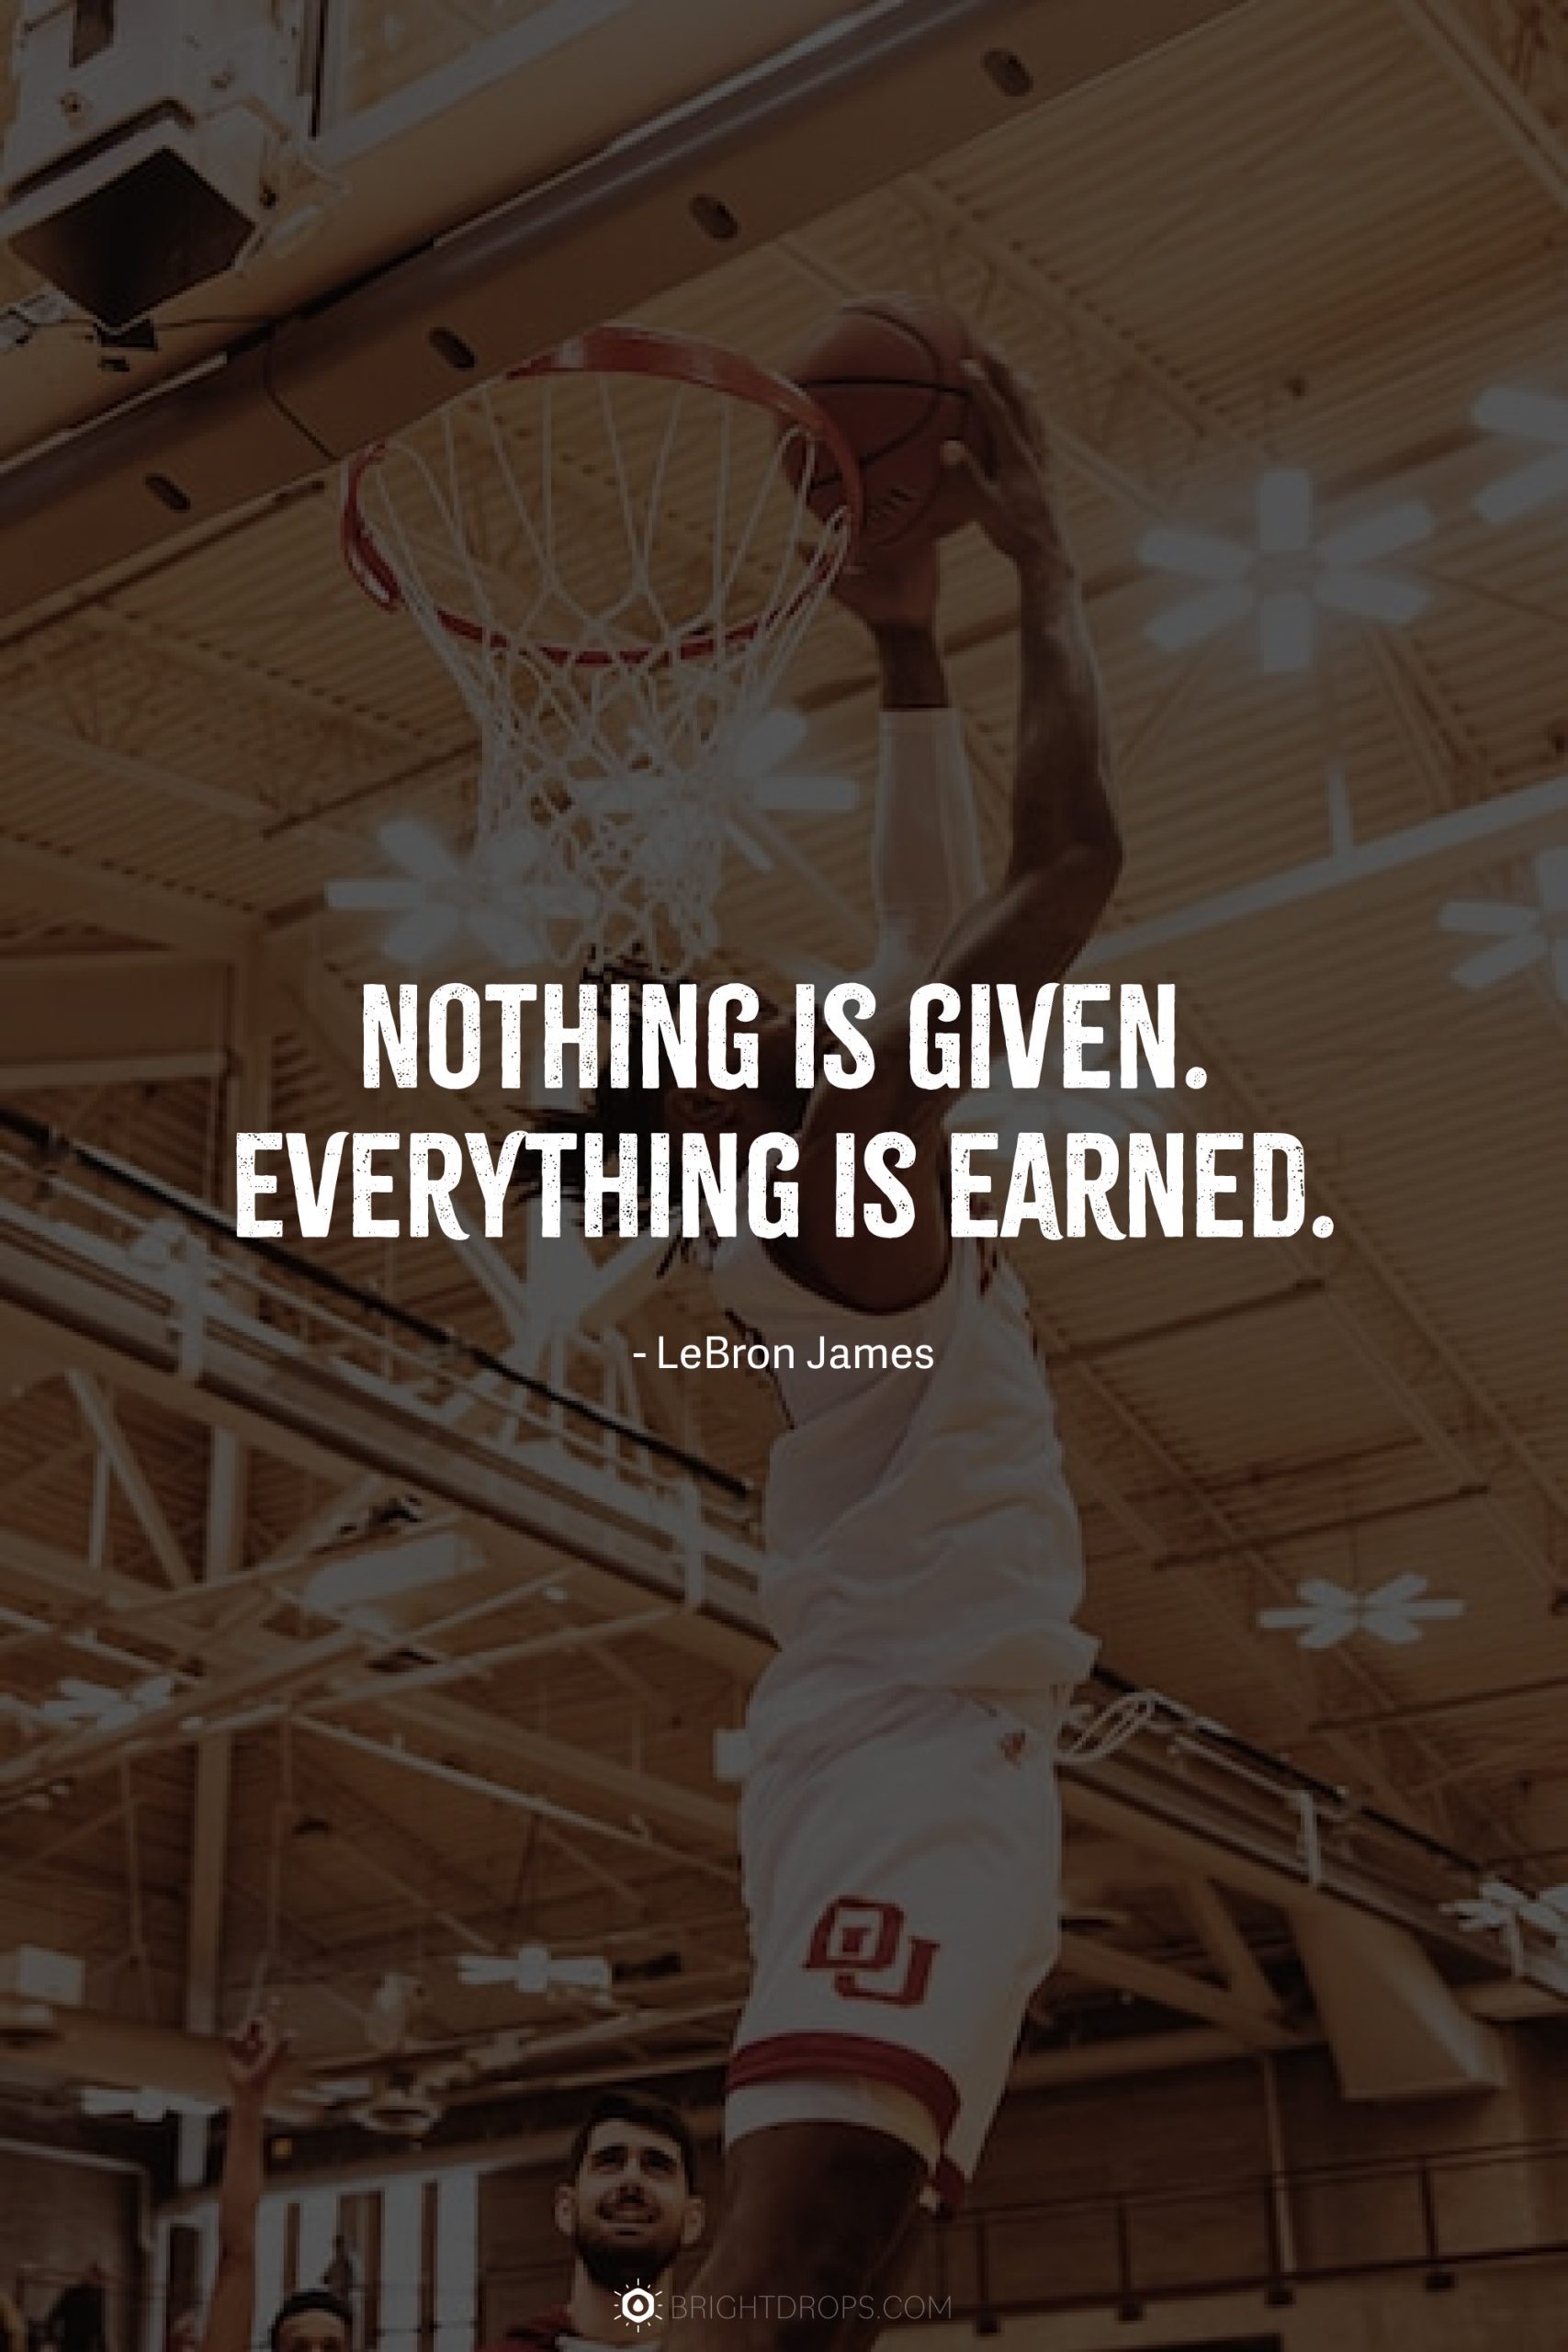 Nothing is given. Everything is earned.